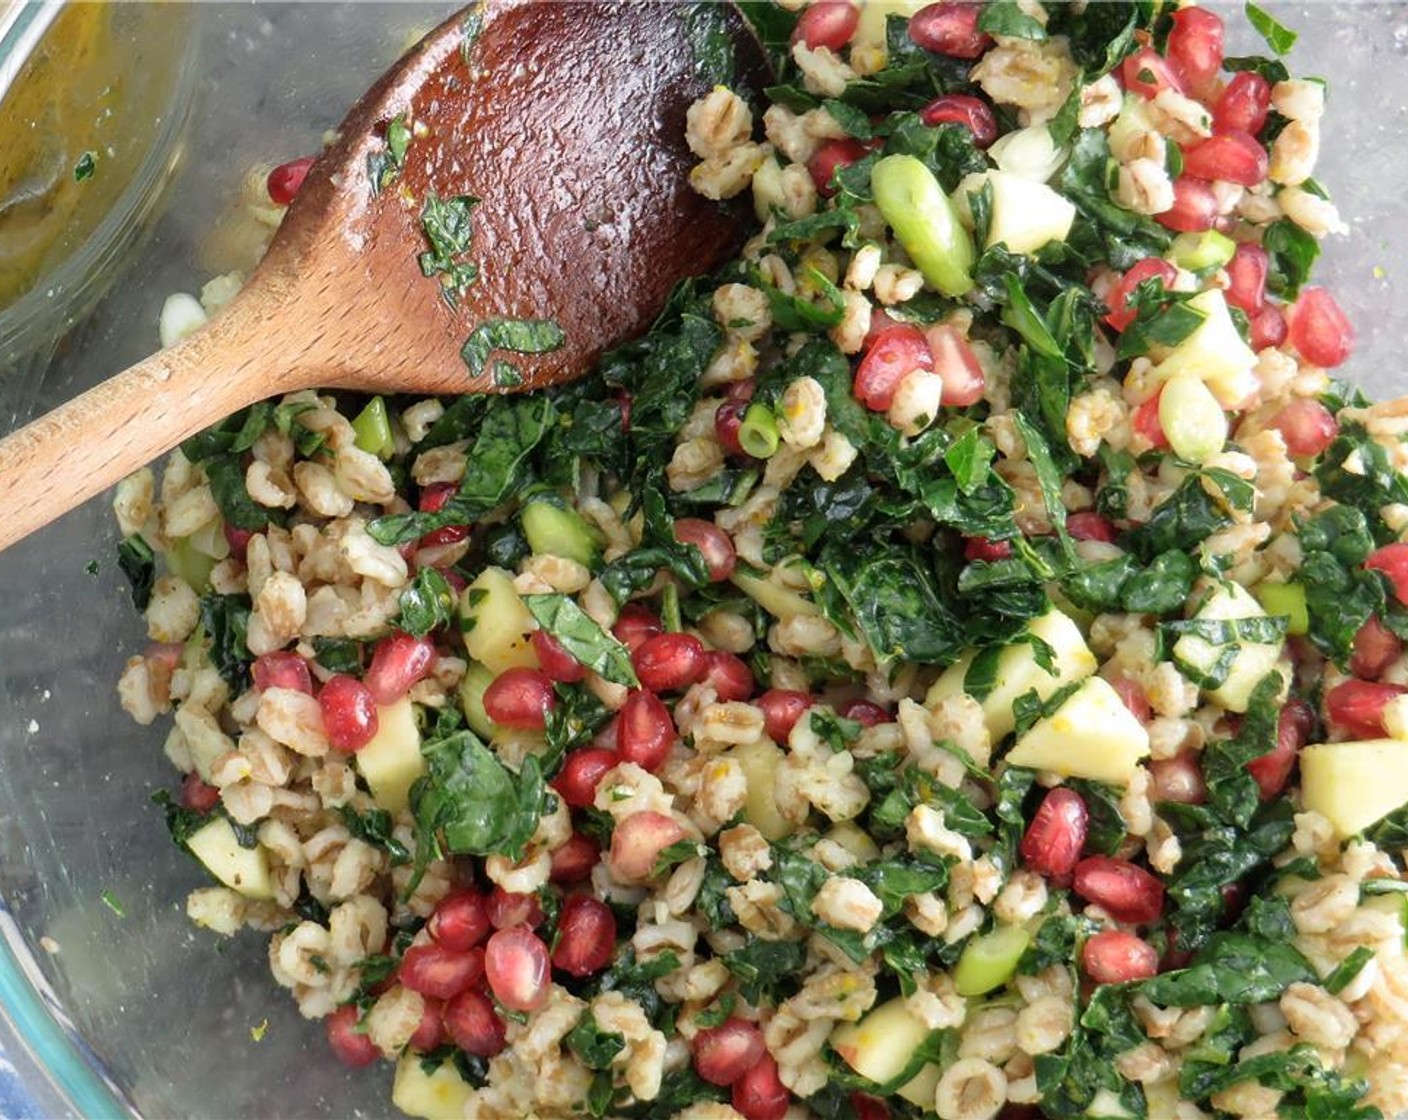 step 4 In a large bowl, combine the Pomegranate Seeds (1/2 cup), apple, Tuscan Kale (2 cups), and farro. Toss to combine. Add 3 tablespoons of the dressing to the salad and toss. Add more dressing if it seems too dry.